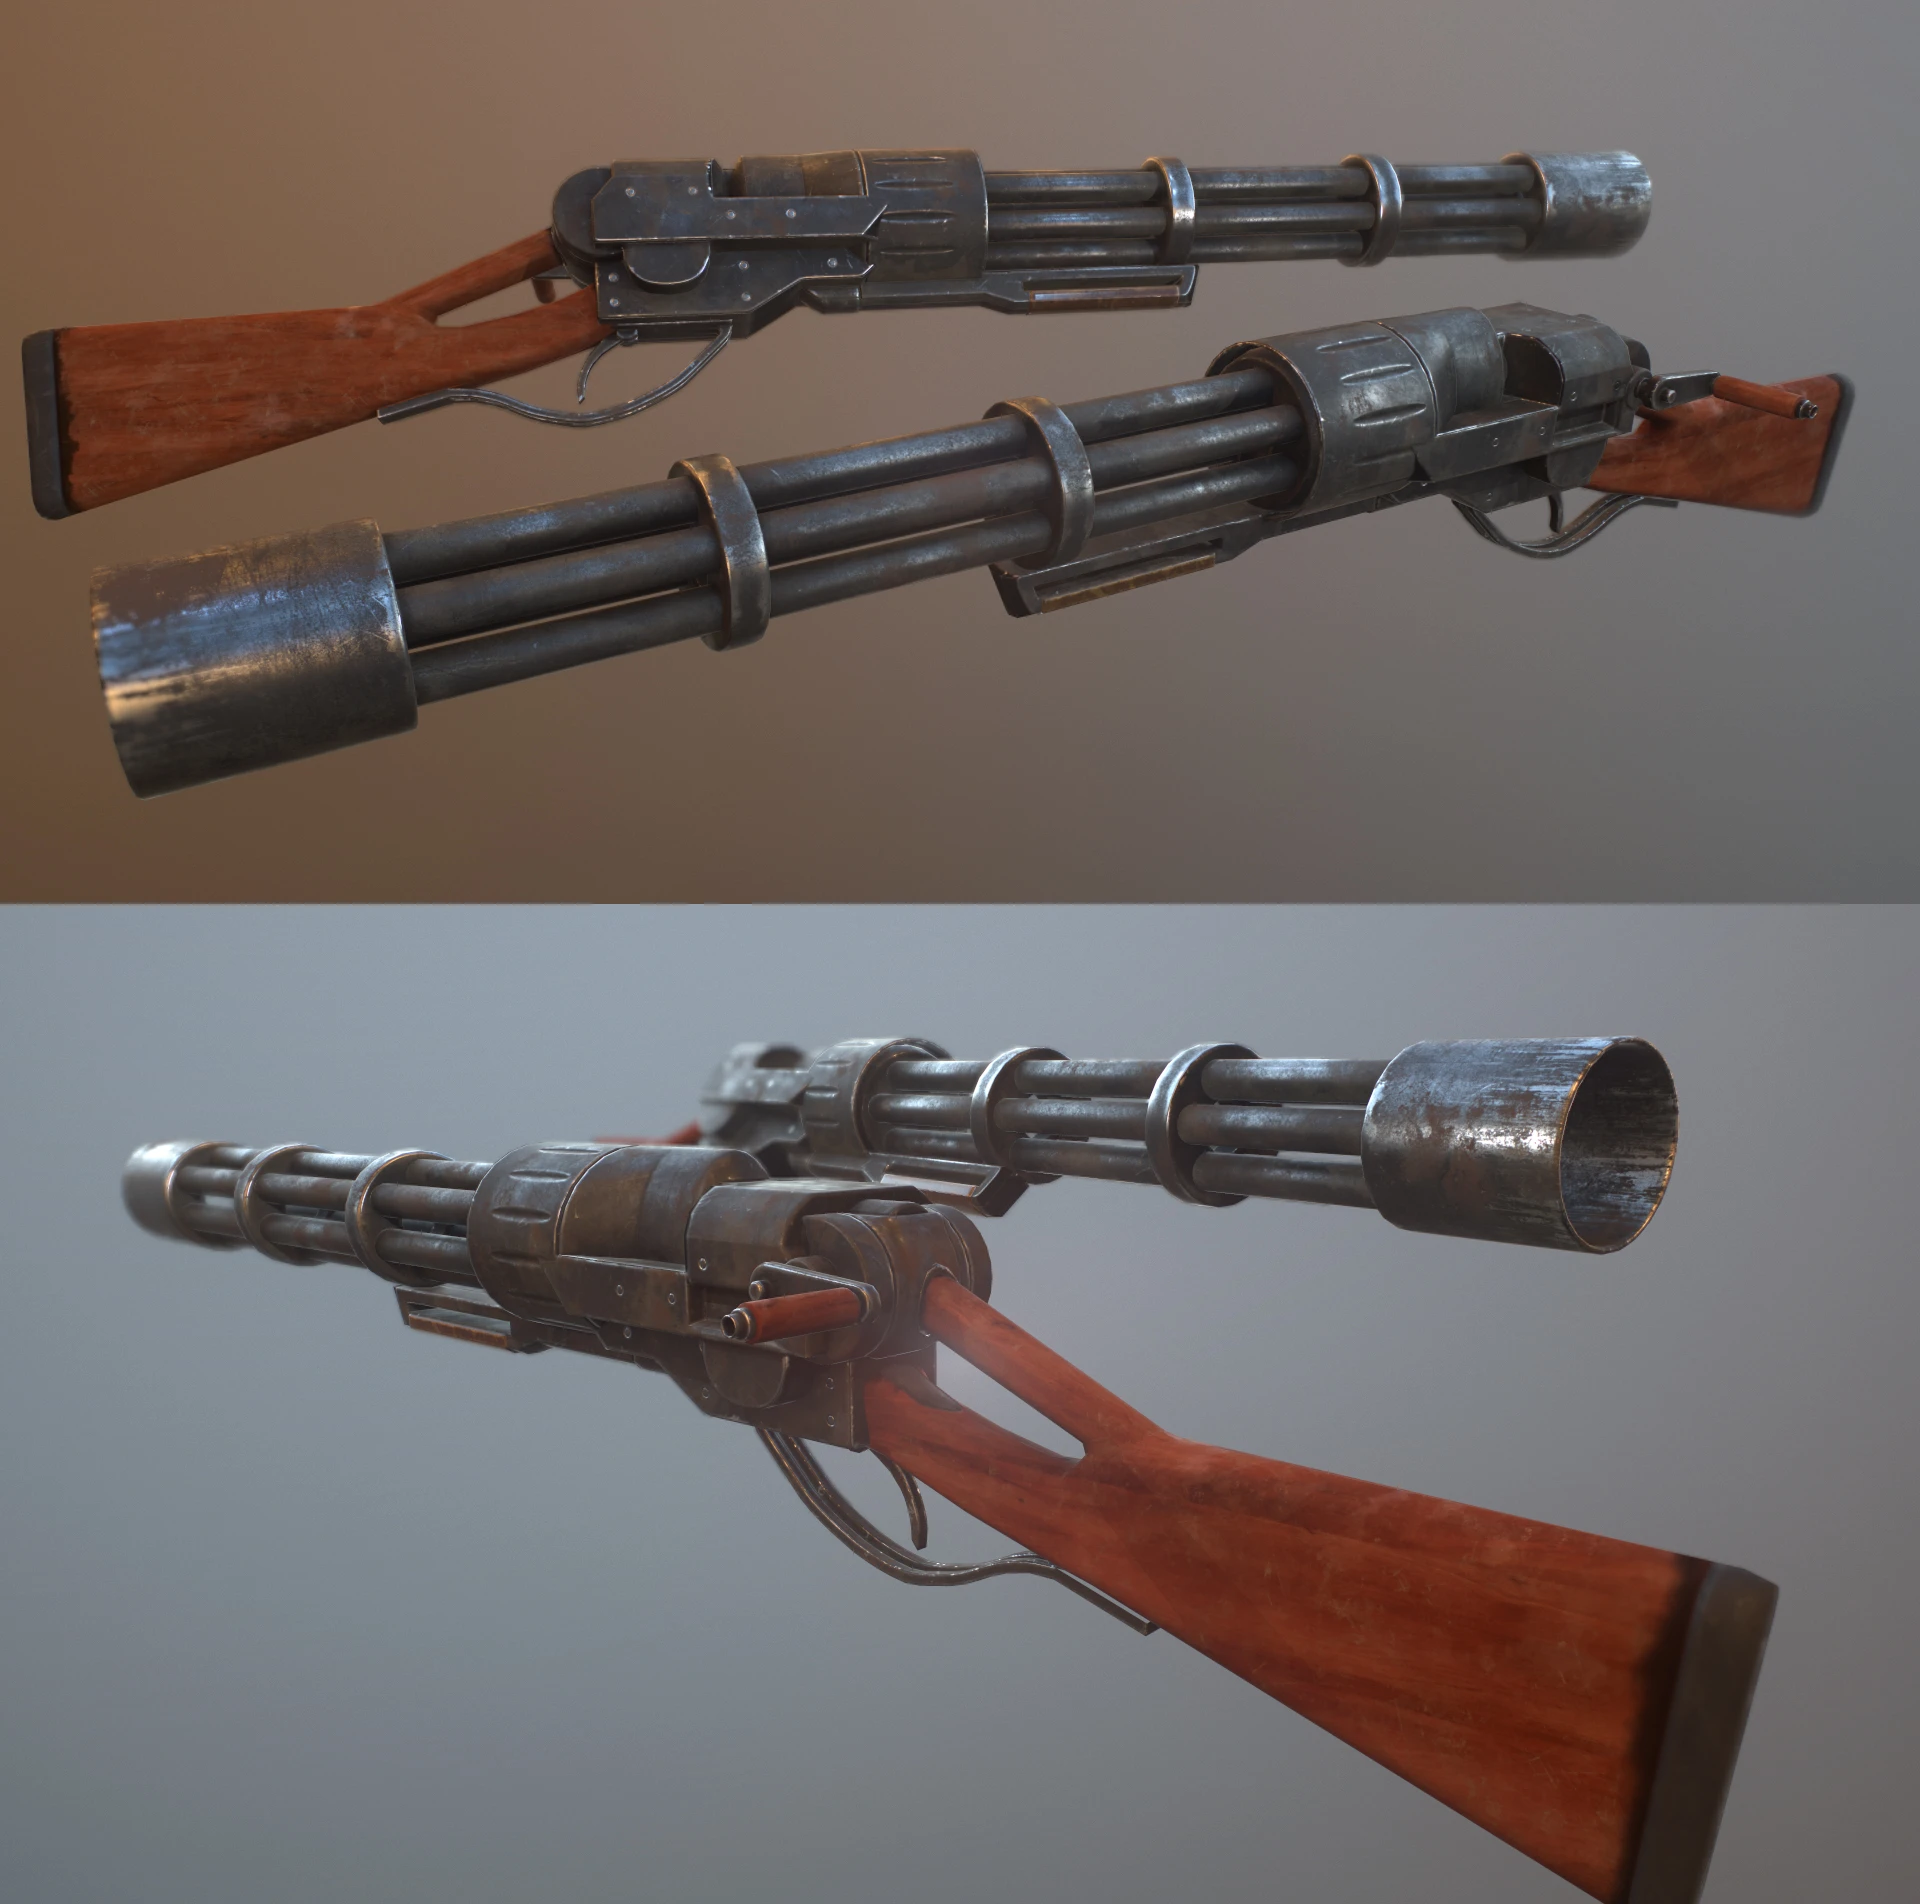 Automatic laser musket fallout 4 фото 33